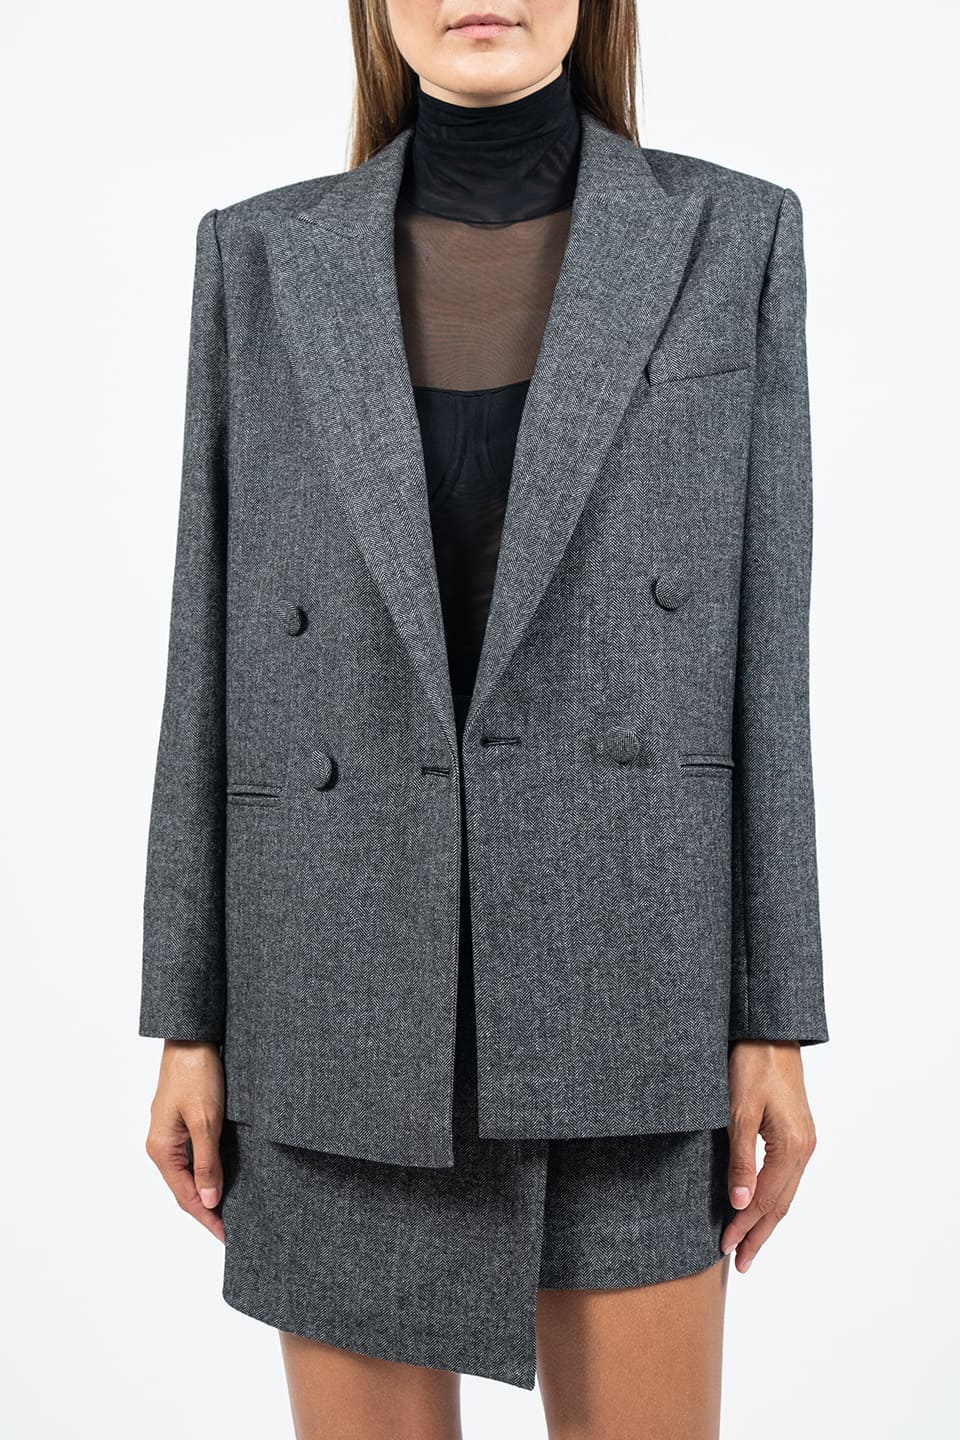 Designer Grey Women blazers, shop online with free delivery in UAE. Product gallery 6